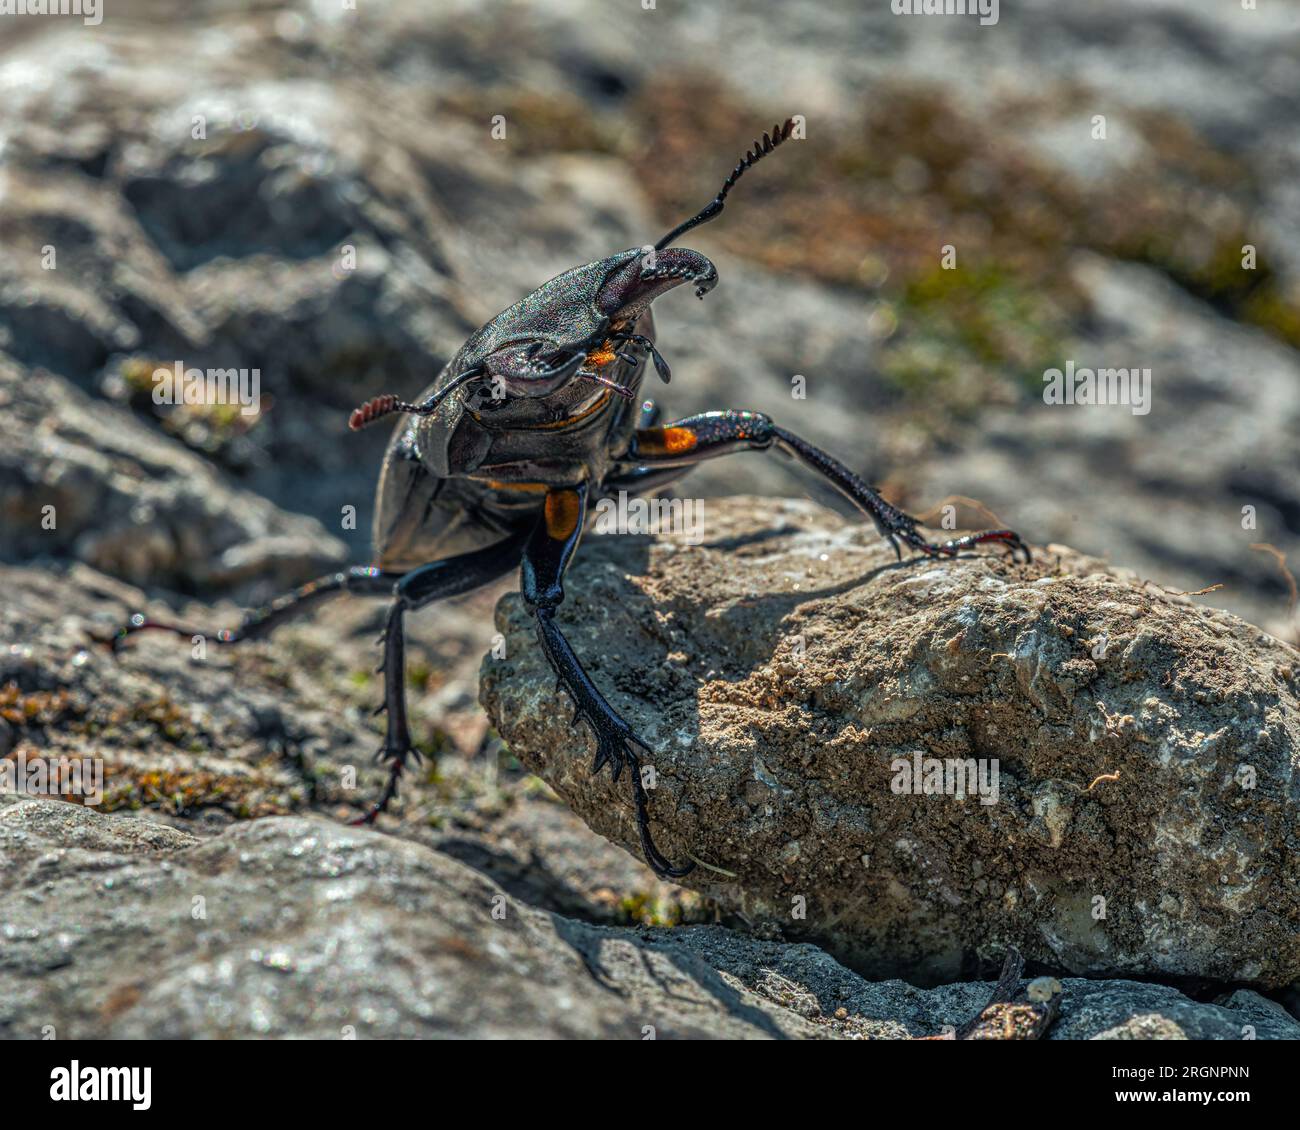 The stag beetle, Lucanus cervus Linnaeus, is a beetle of the Lucanidae family. Abruzzo, Italy, Europe Stock Photo